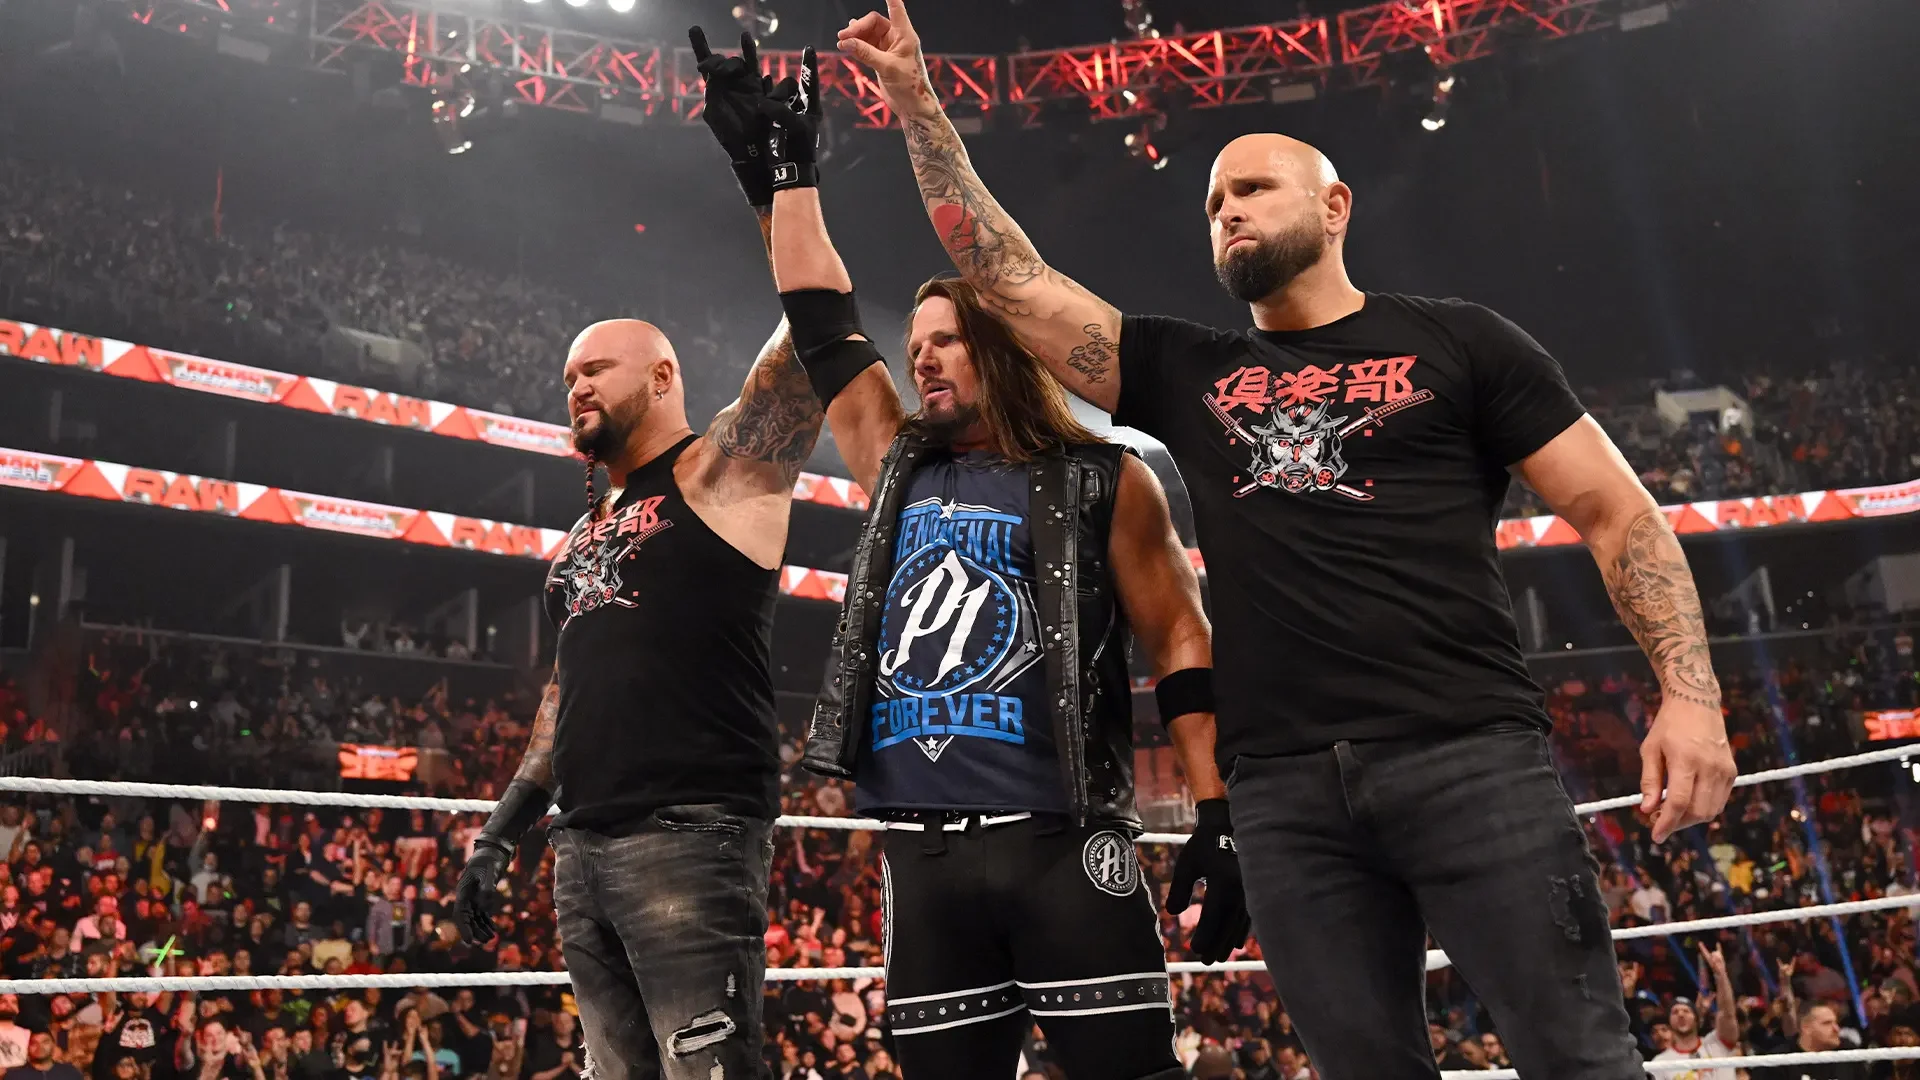 Brock Lesnar's Return, Luke Gallows and Karl Anderson Match & More Announced For WWE RAW